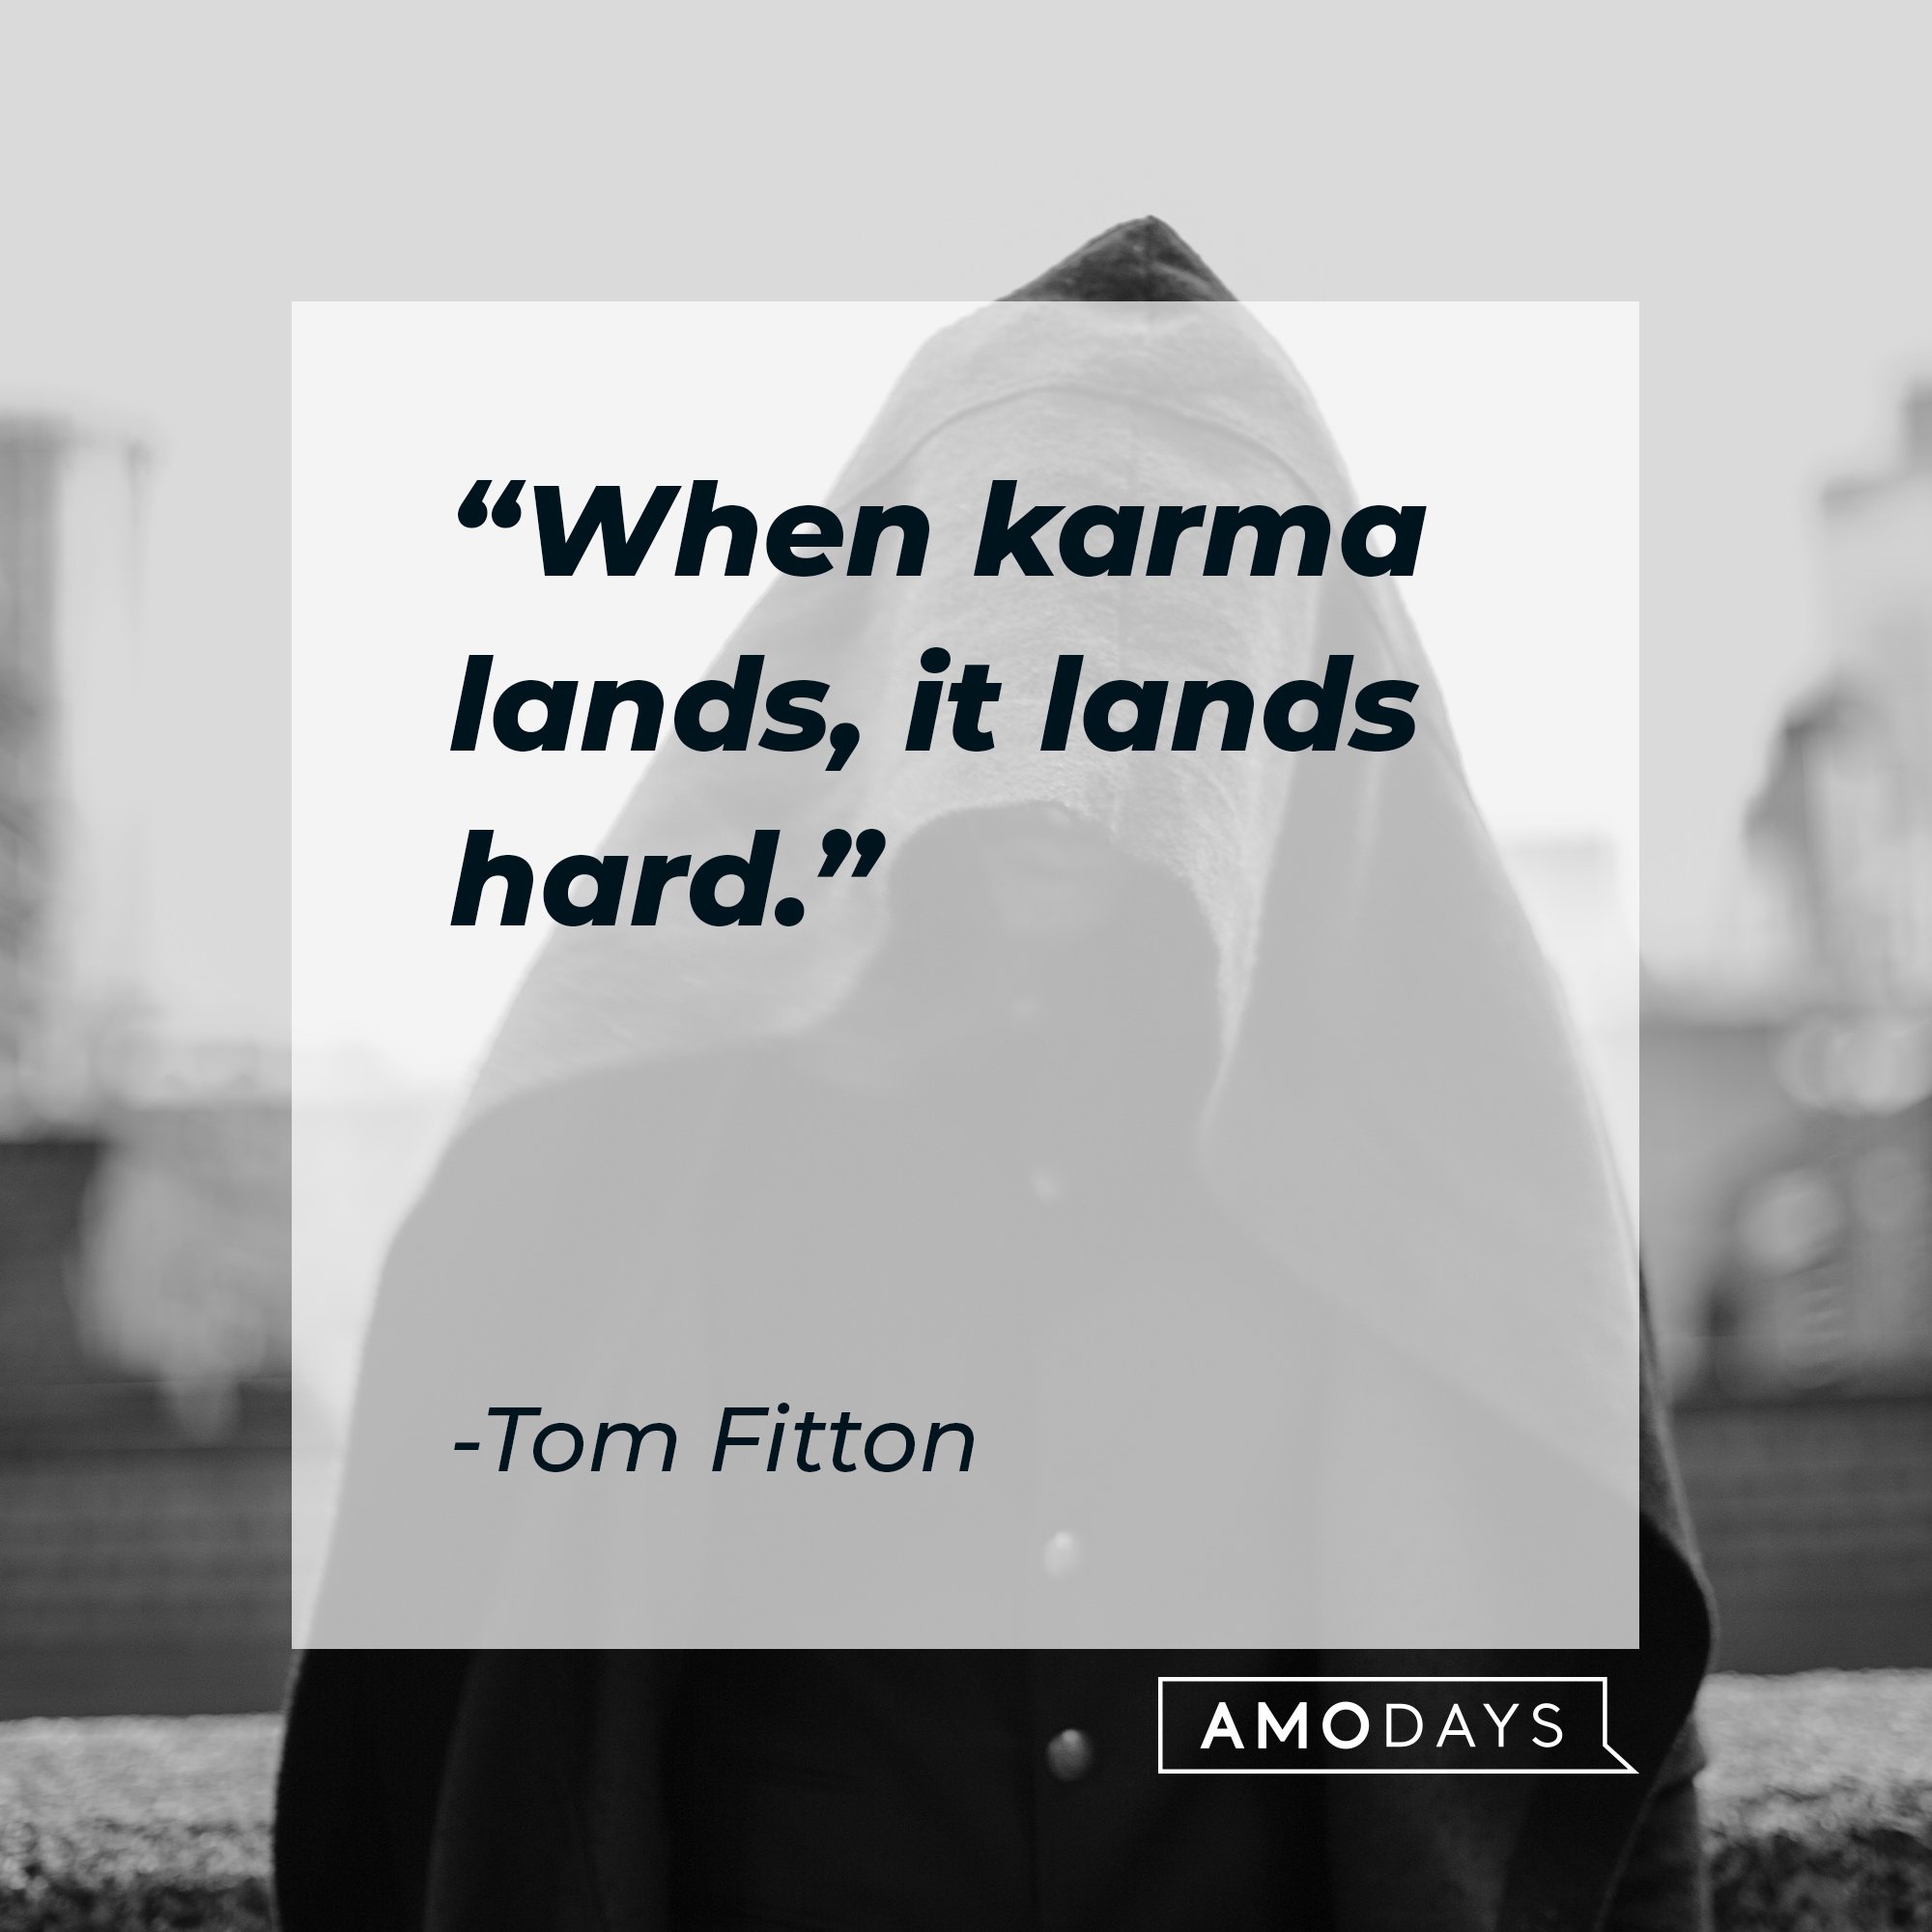 Tom Fitton's quote: "When karma lands, it lands hard." | Image: AmoDays